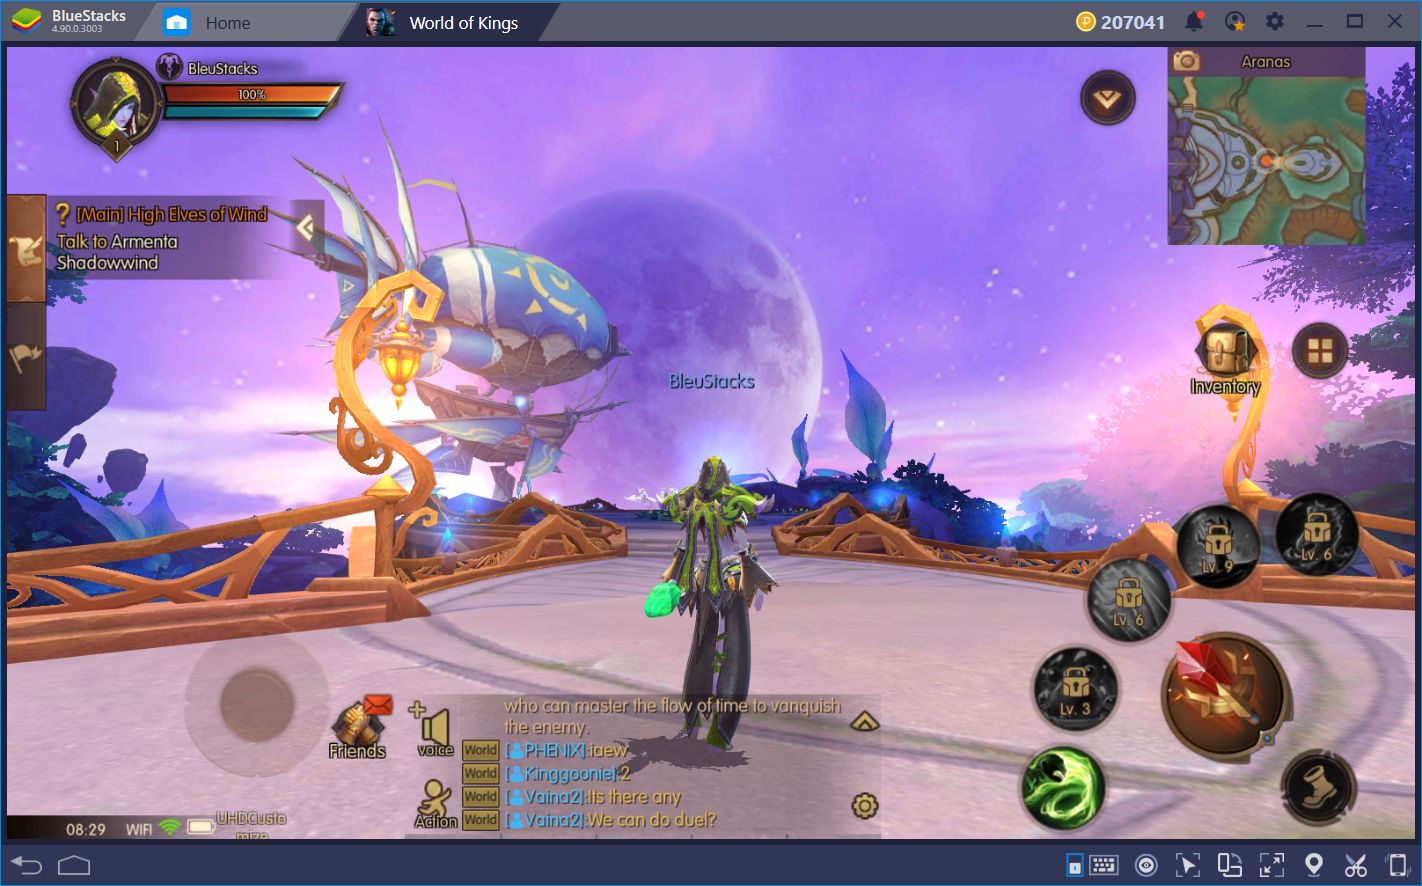 World of Kings: Like World of Warcraft, but on Android